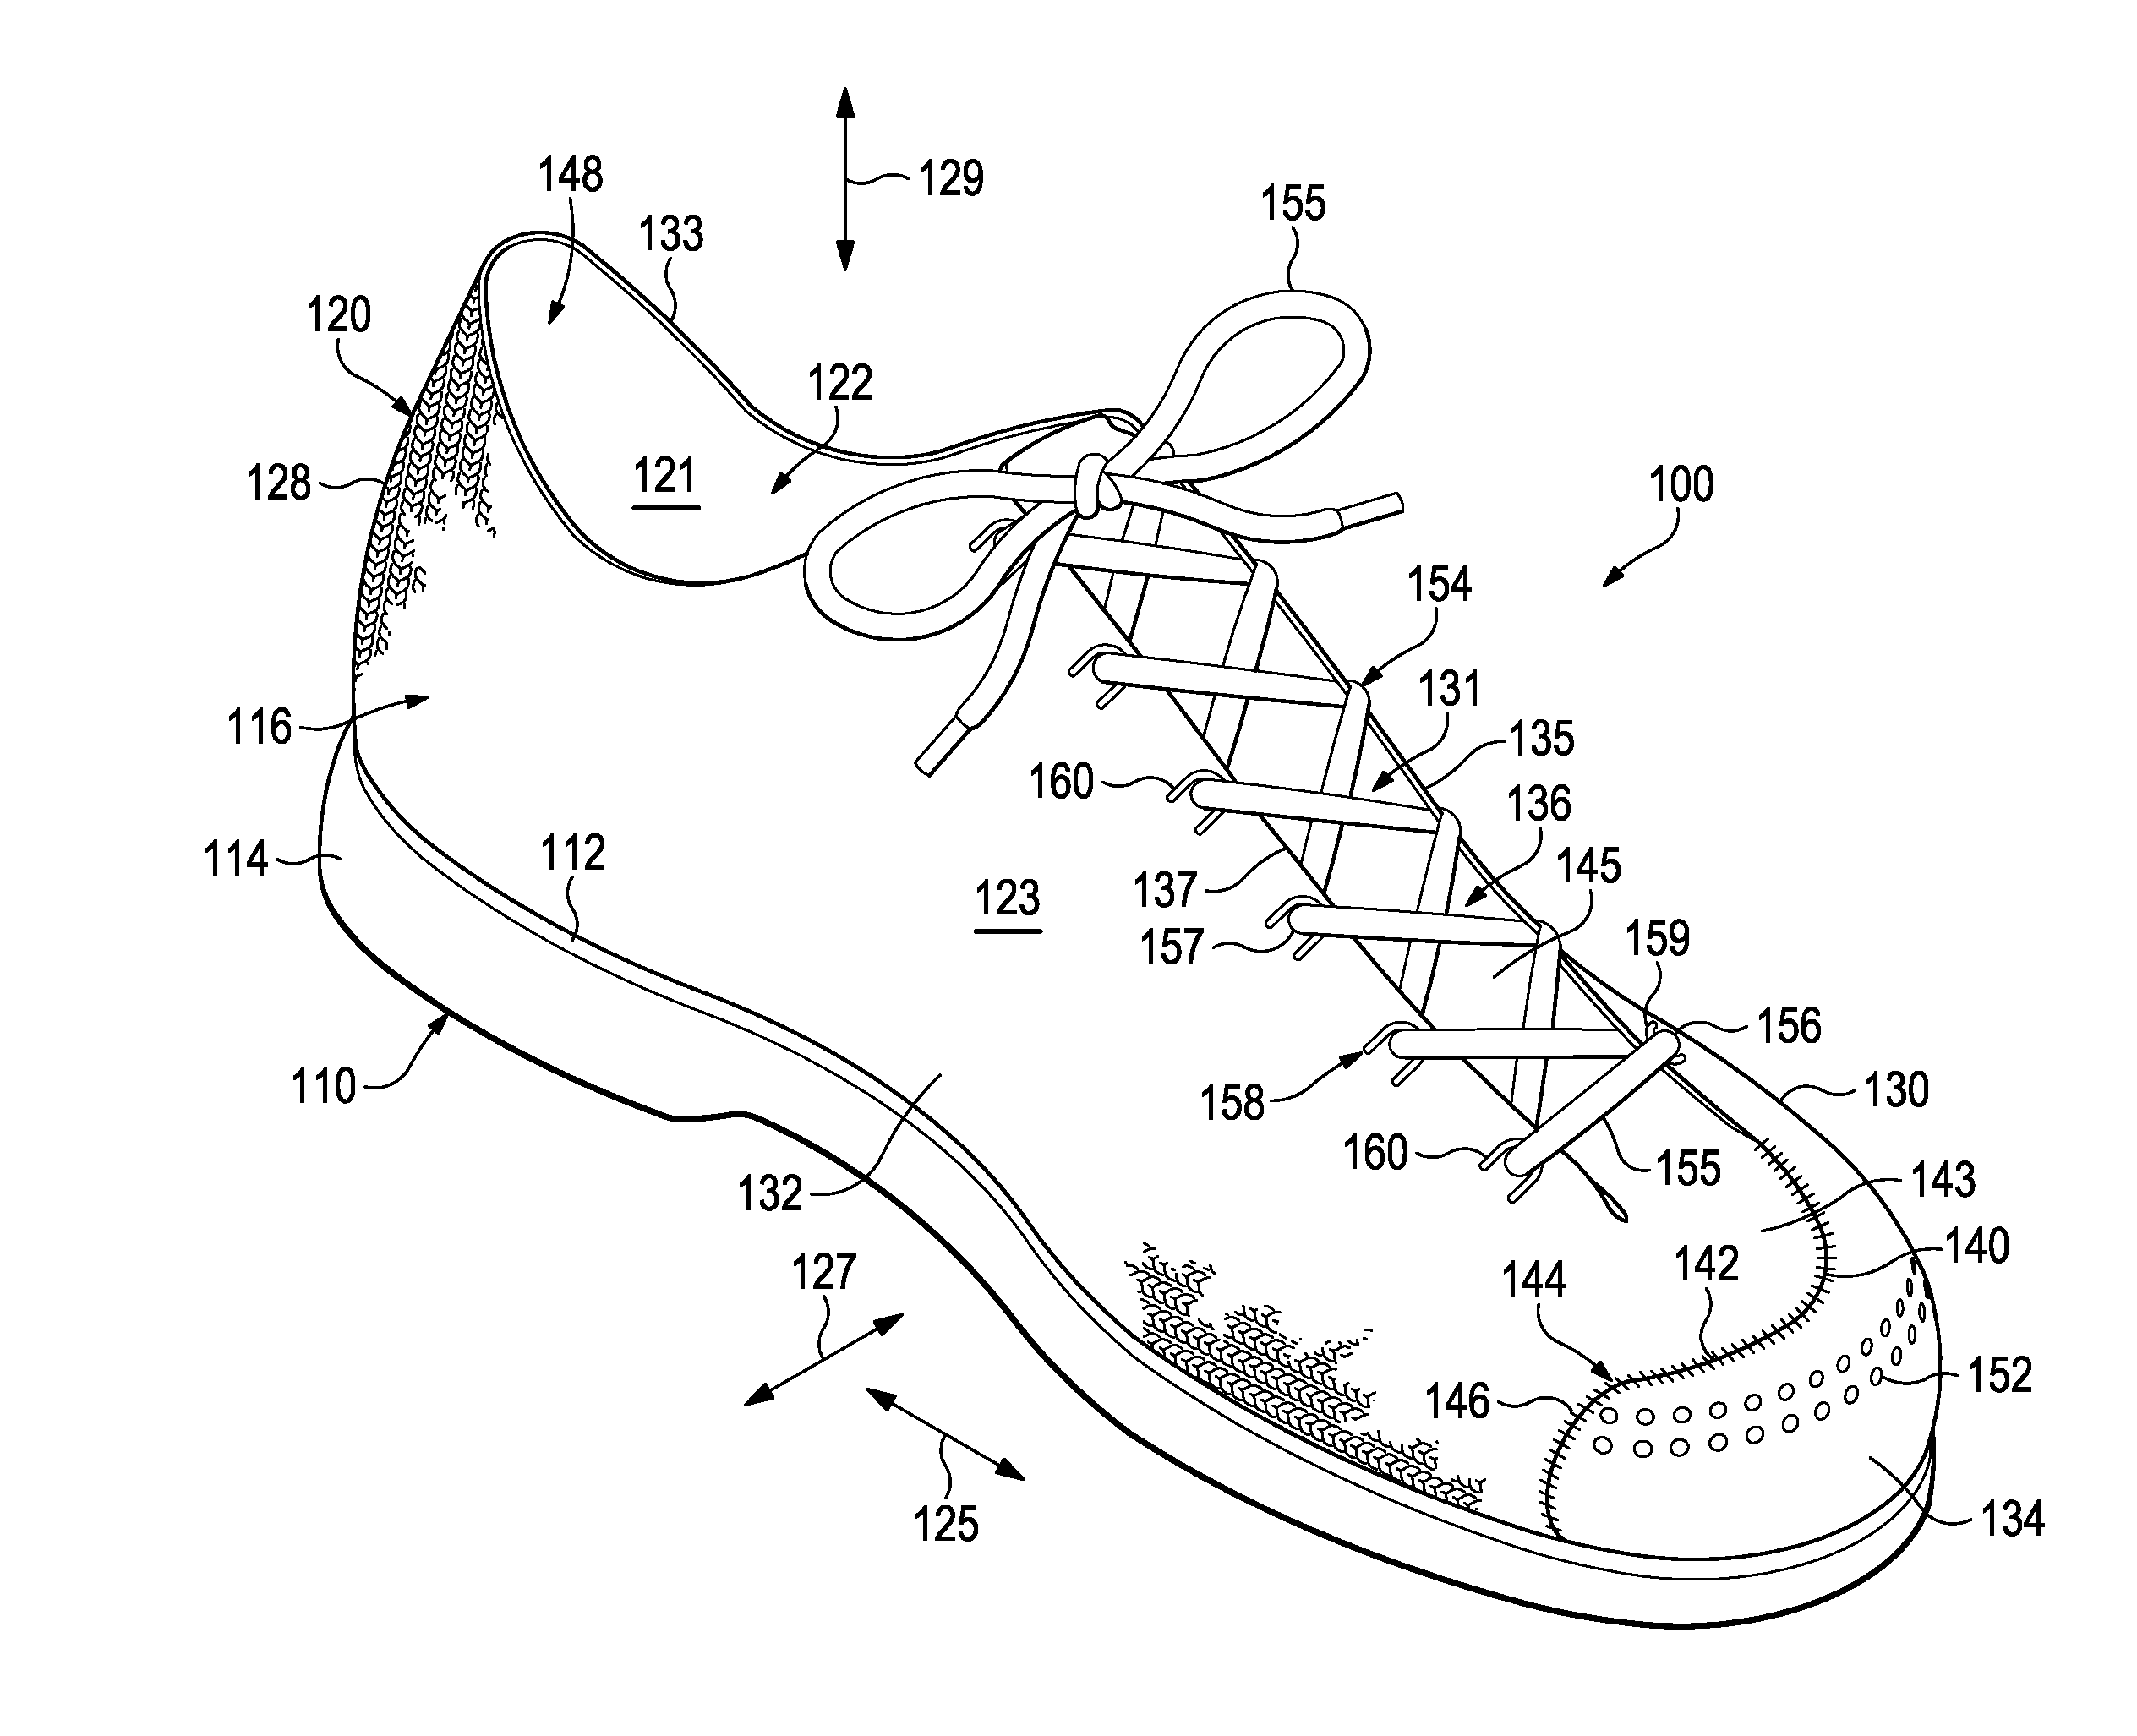 Article Of Footwear Incorporating A Knitted Component With Tensile Strand